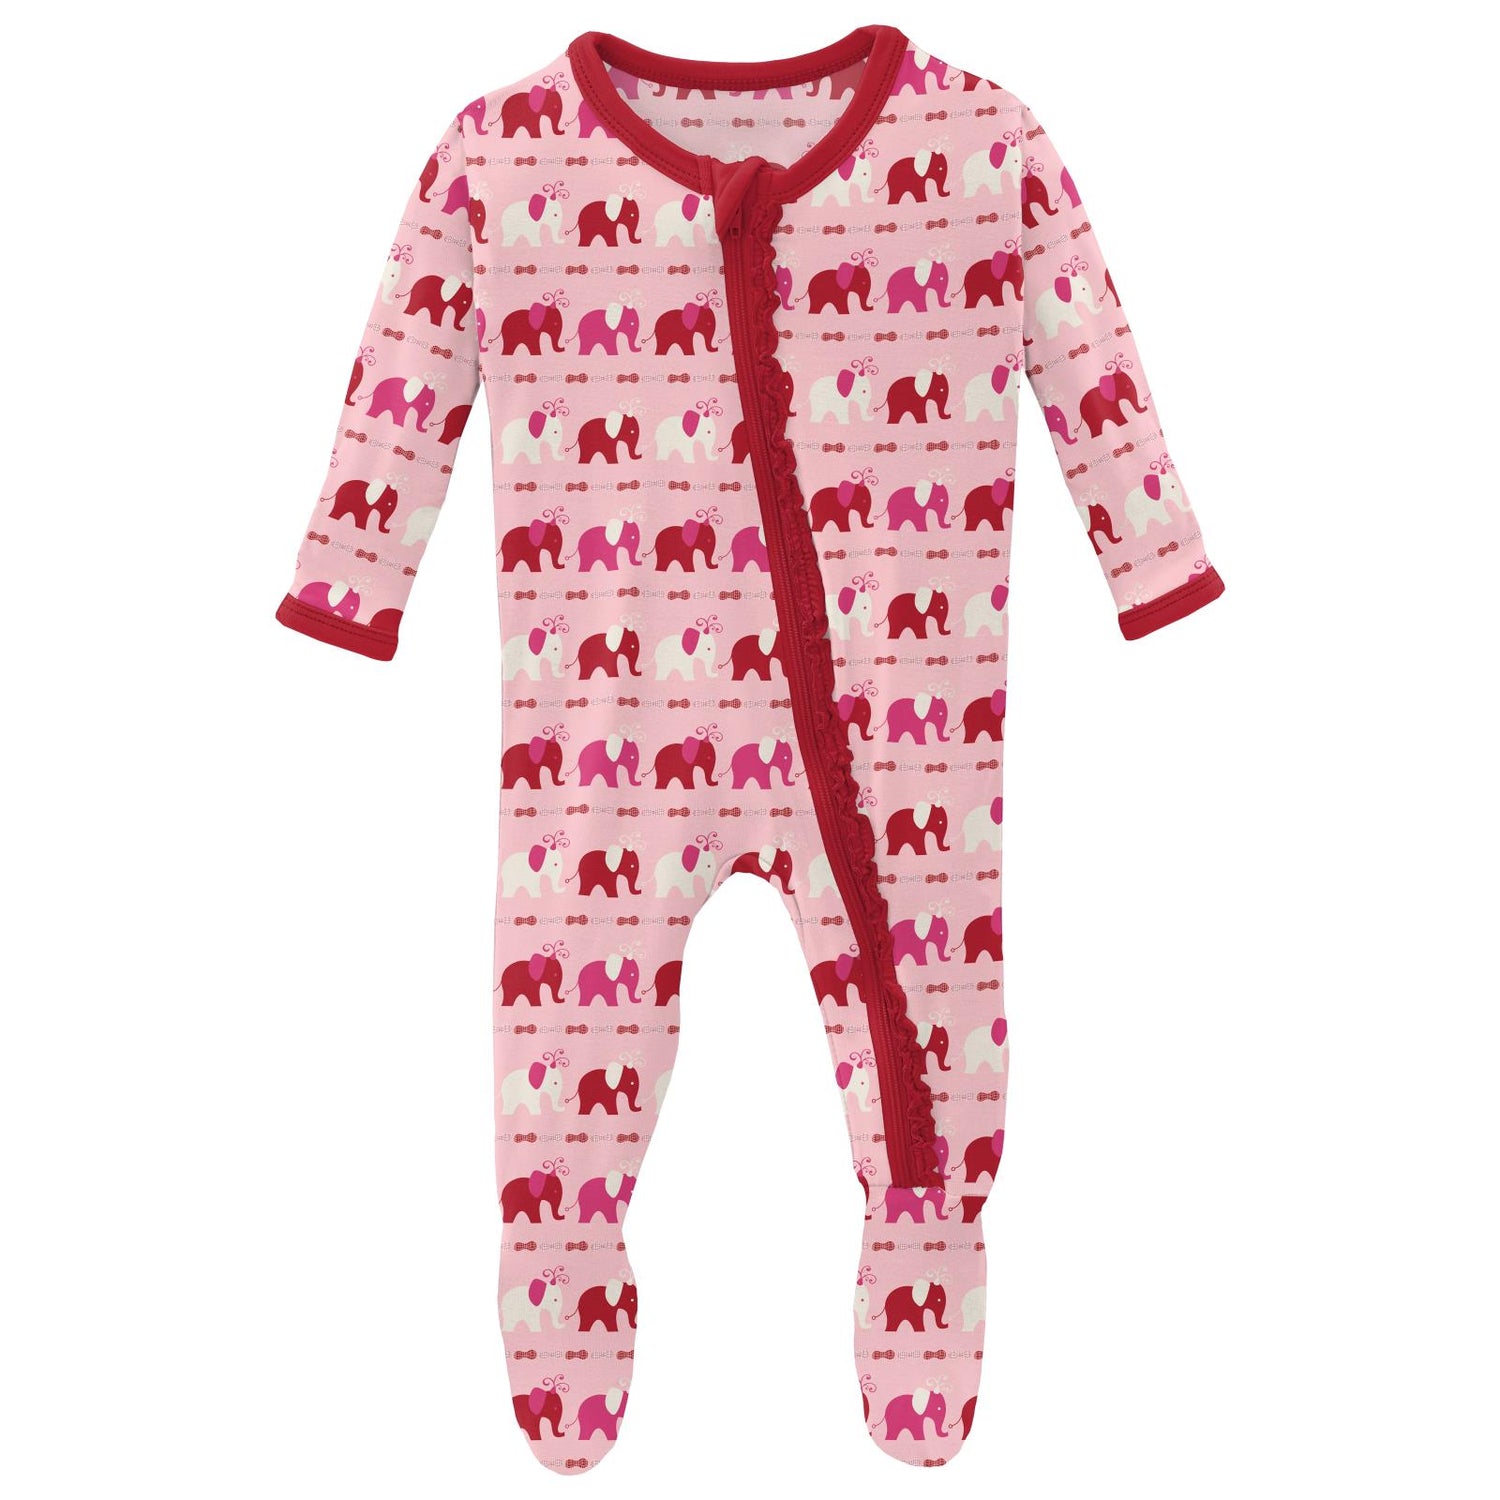 Print Muffin Ruffle Footie with Zipper in Calypso Elephant